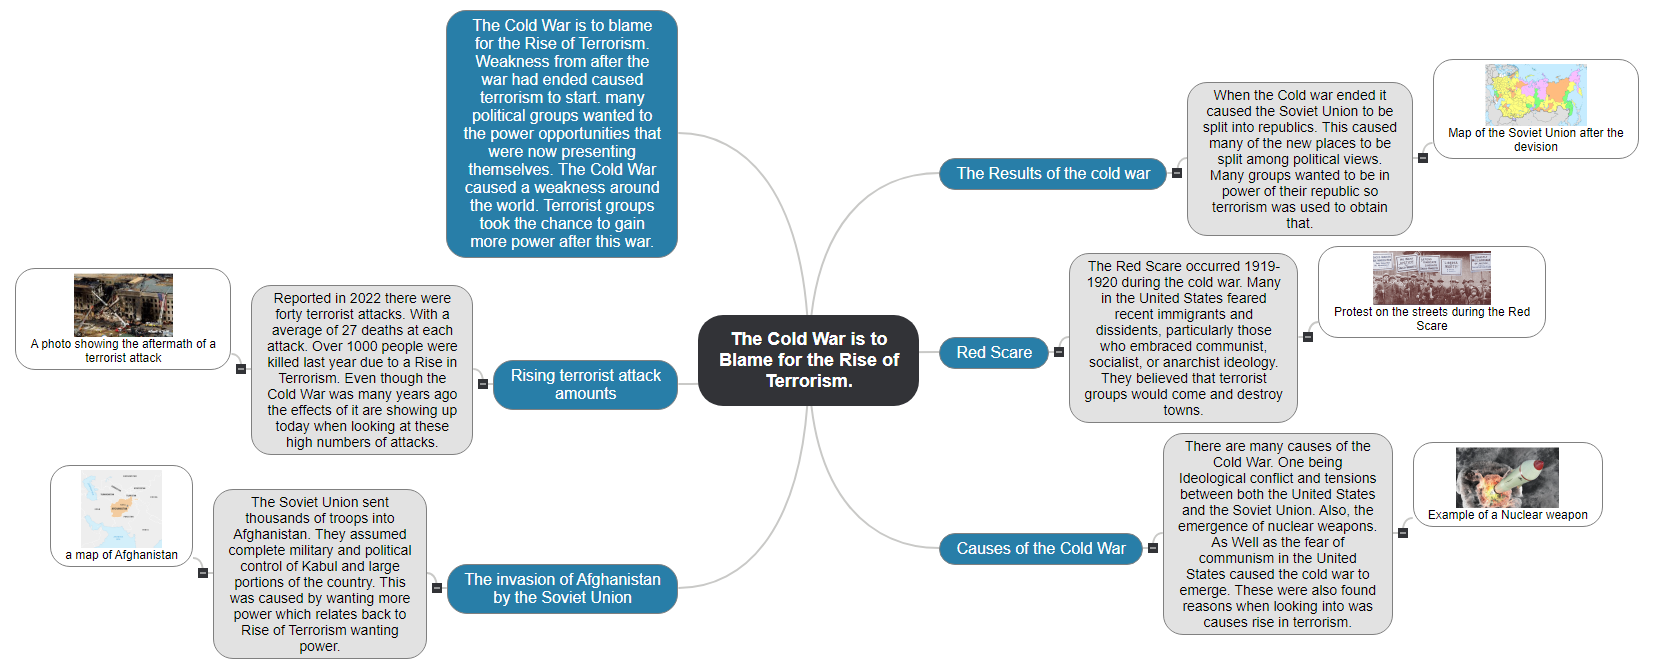 The Cold War is to Blame for the Rise of Terrorism Mind Map